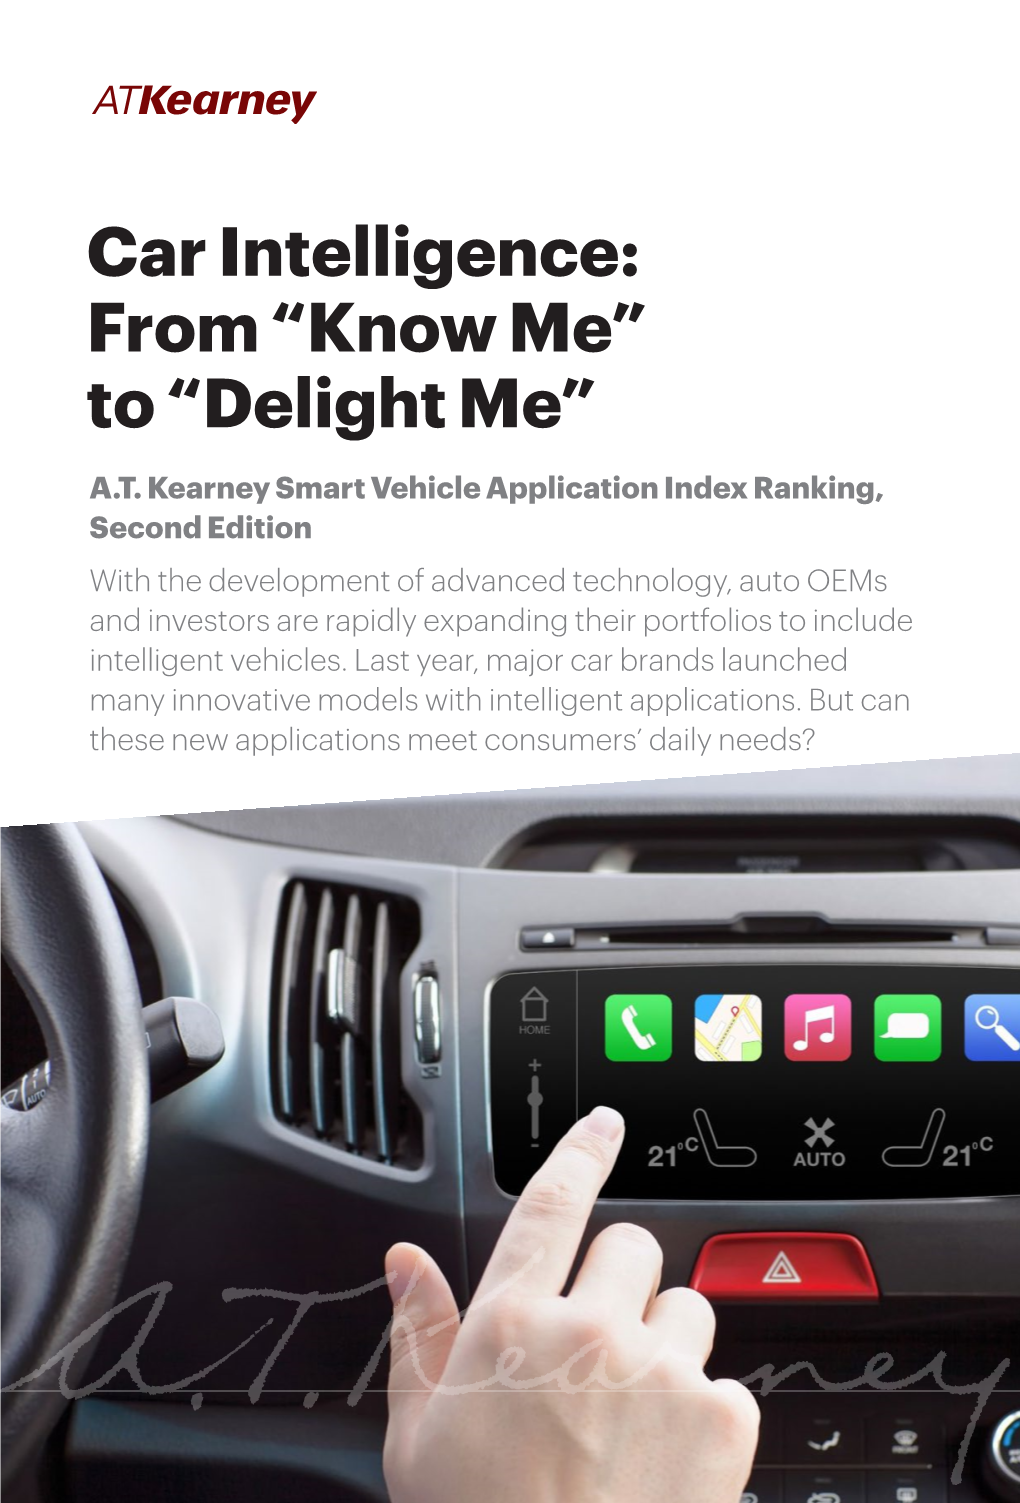 Car Intelligence: from “Know Me” to “Delight Me”